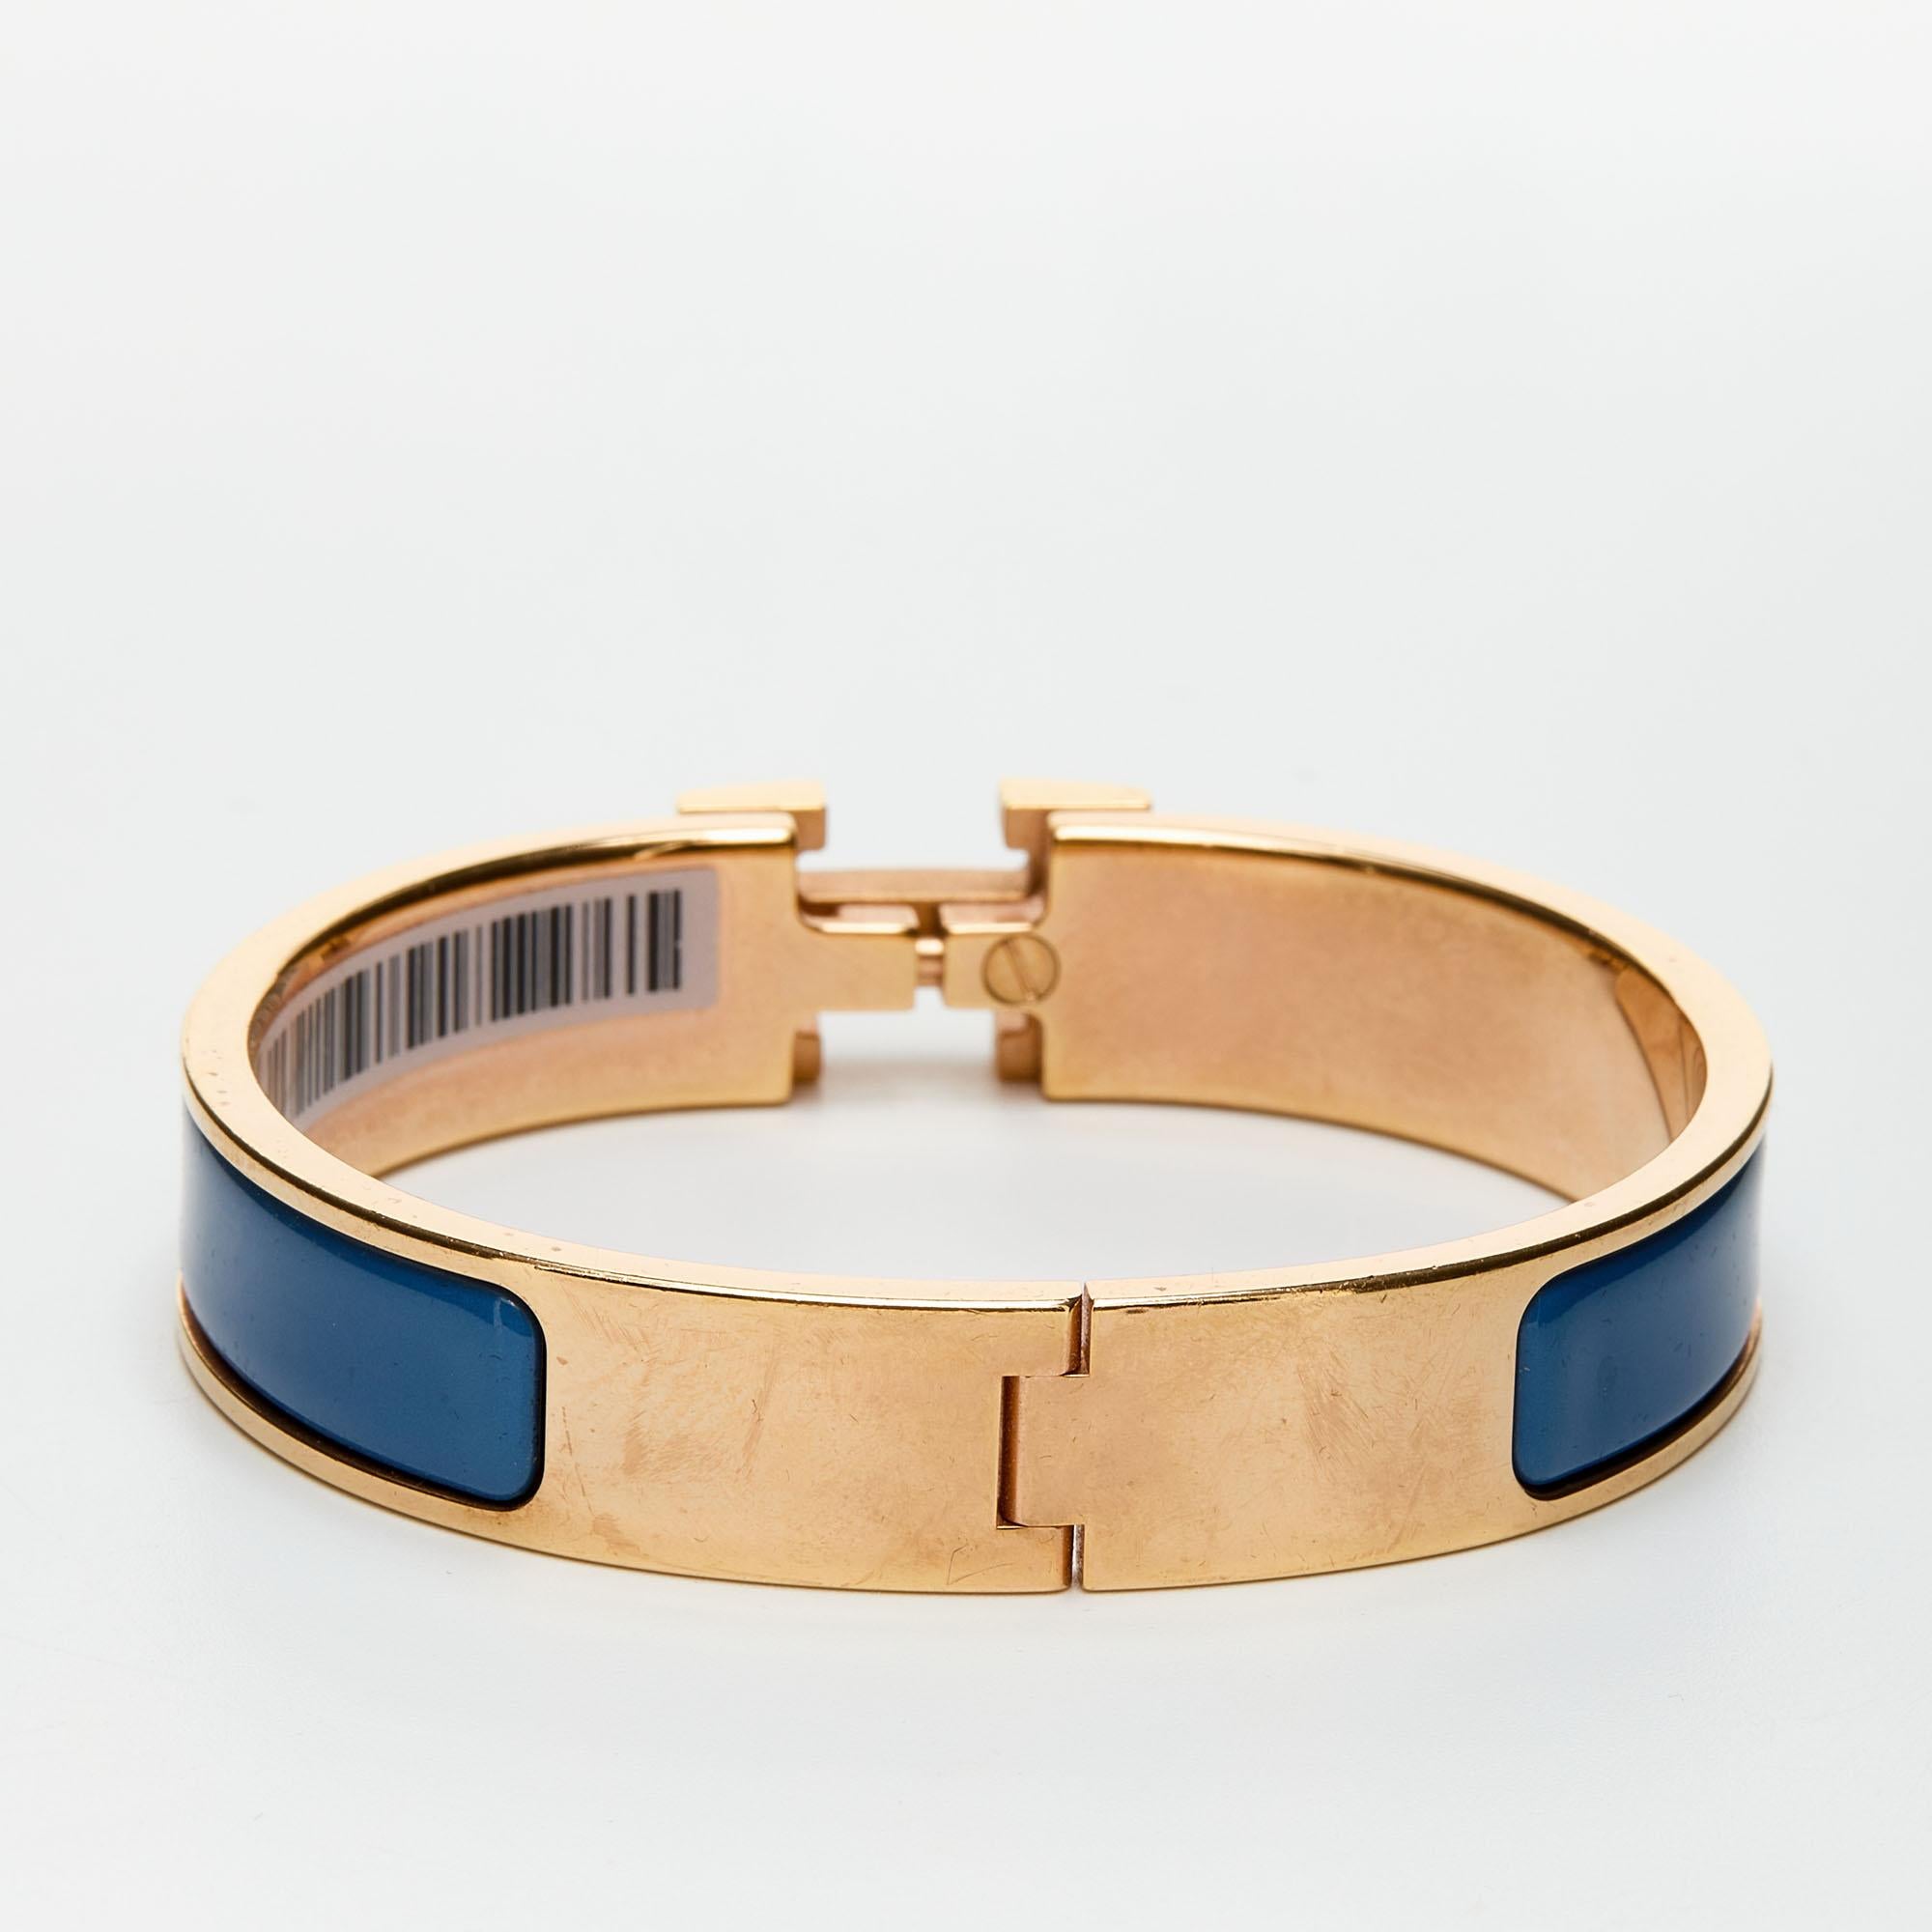 This bracelet embodies Hermès’ elegant craftsmanship with its gold-plated body and an enamel inlay. Featuring the iconic H logo of the fashion house at the front, this bracelet is the accessory to buy today!

Includes: Original Dustbag, Original